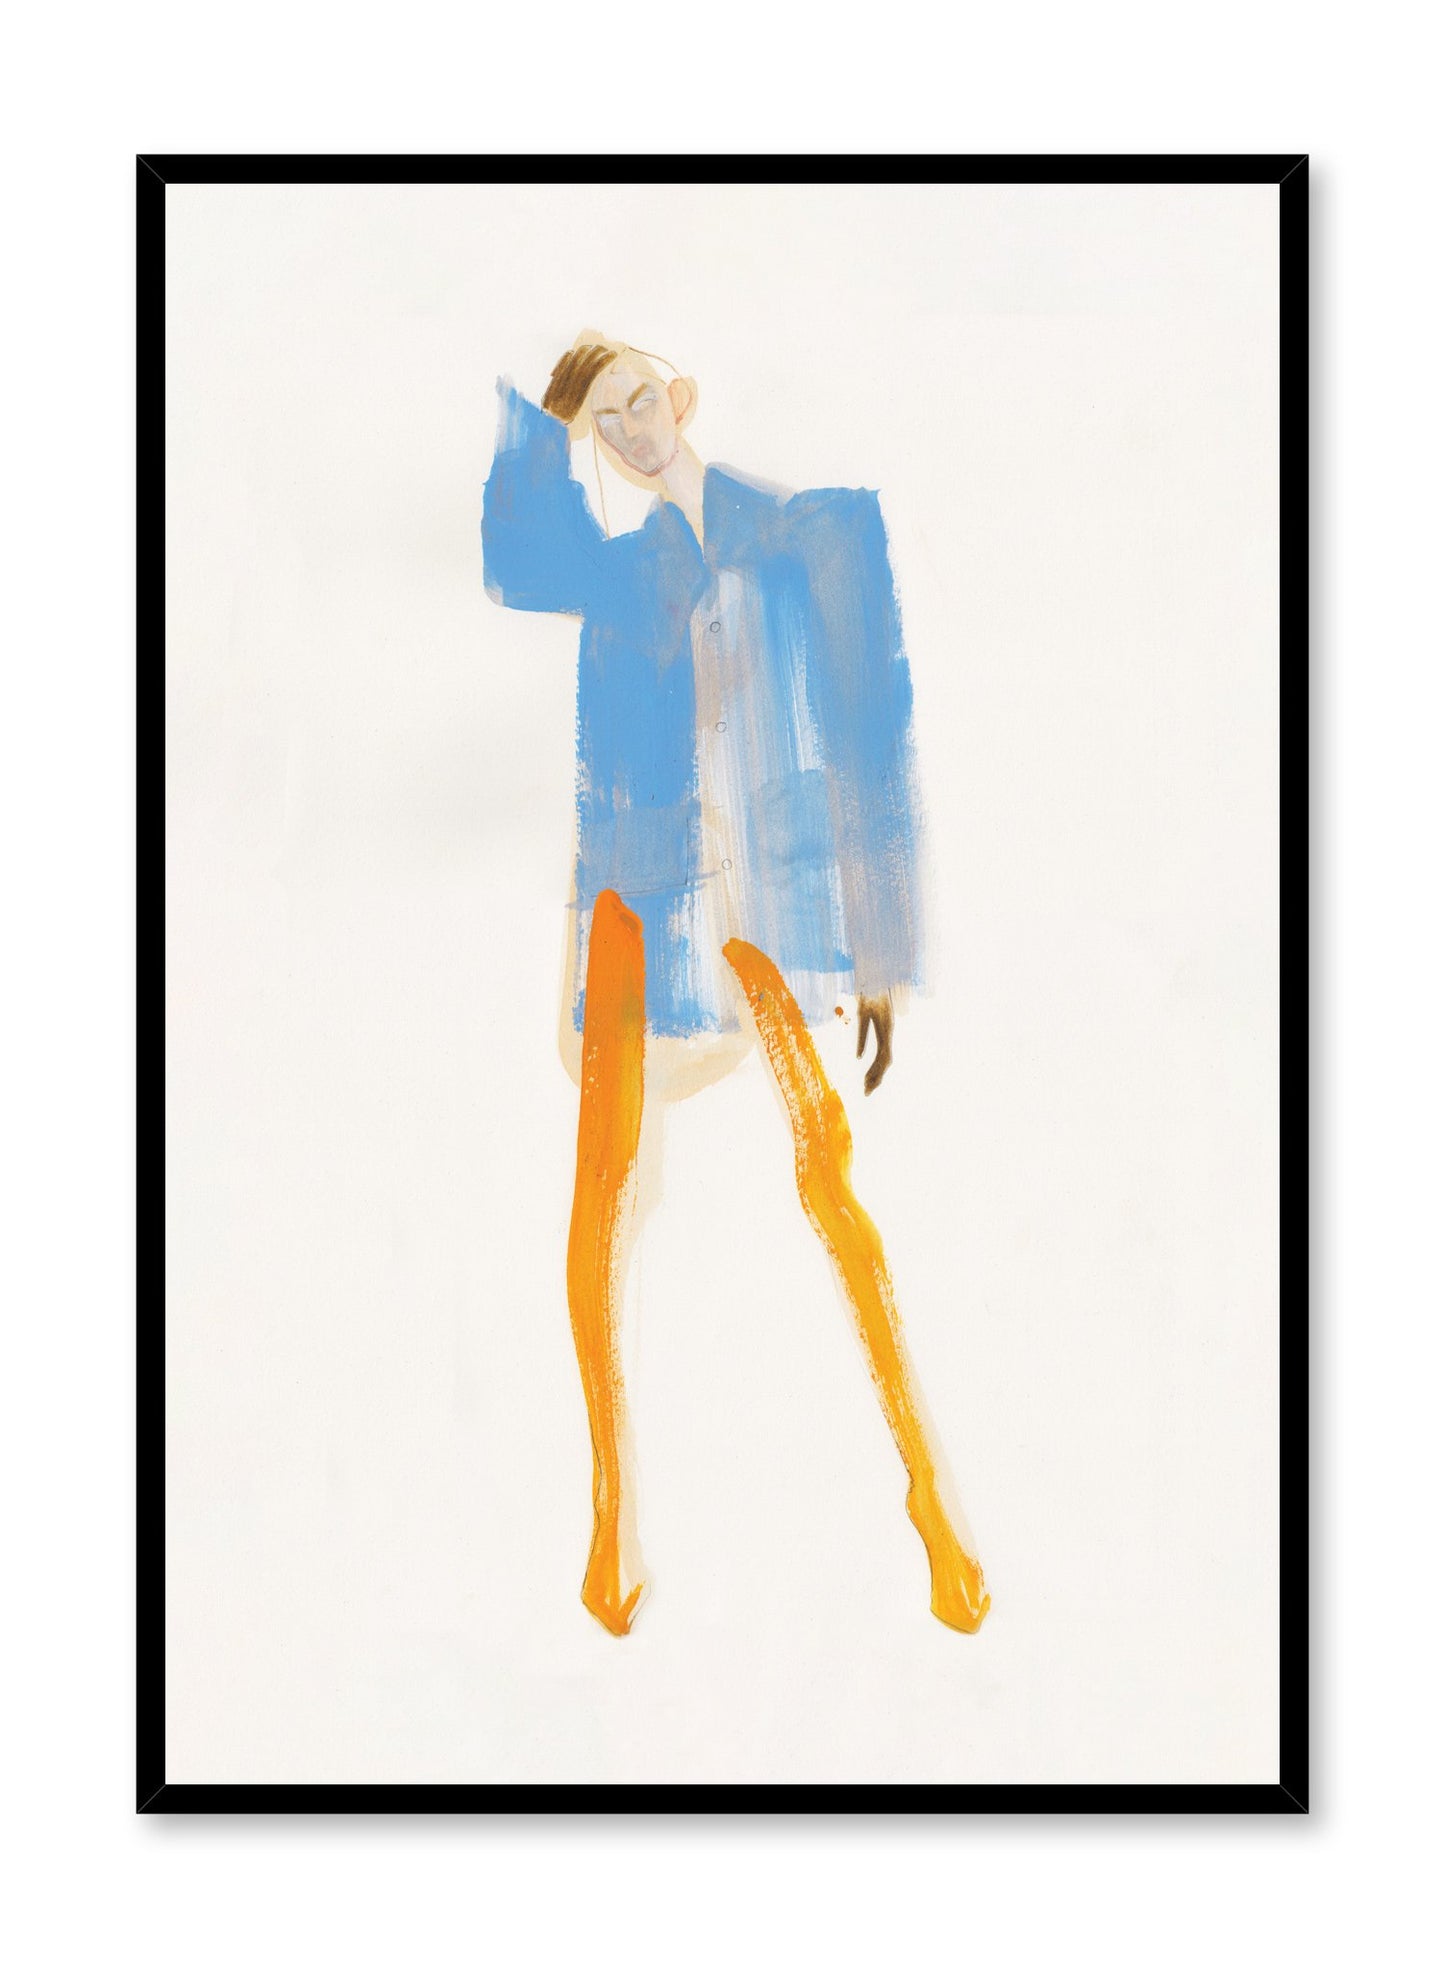 Minimalist painting by Opposite Wall of an androginous model wearing an orange and blue Balenciaga outfit by fashion illustrator Amelie Hegardt.